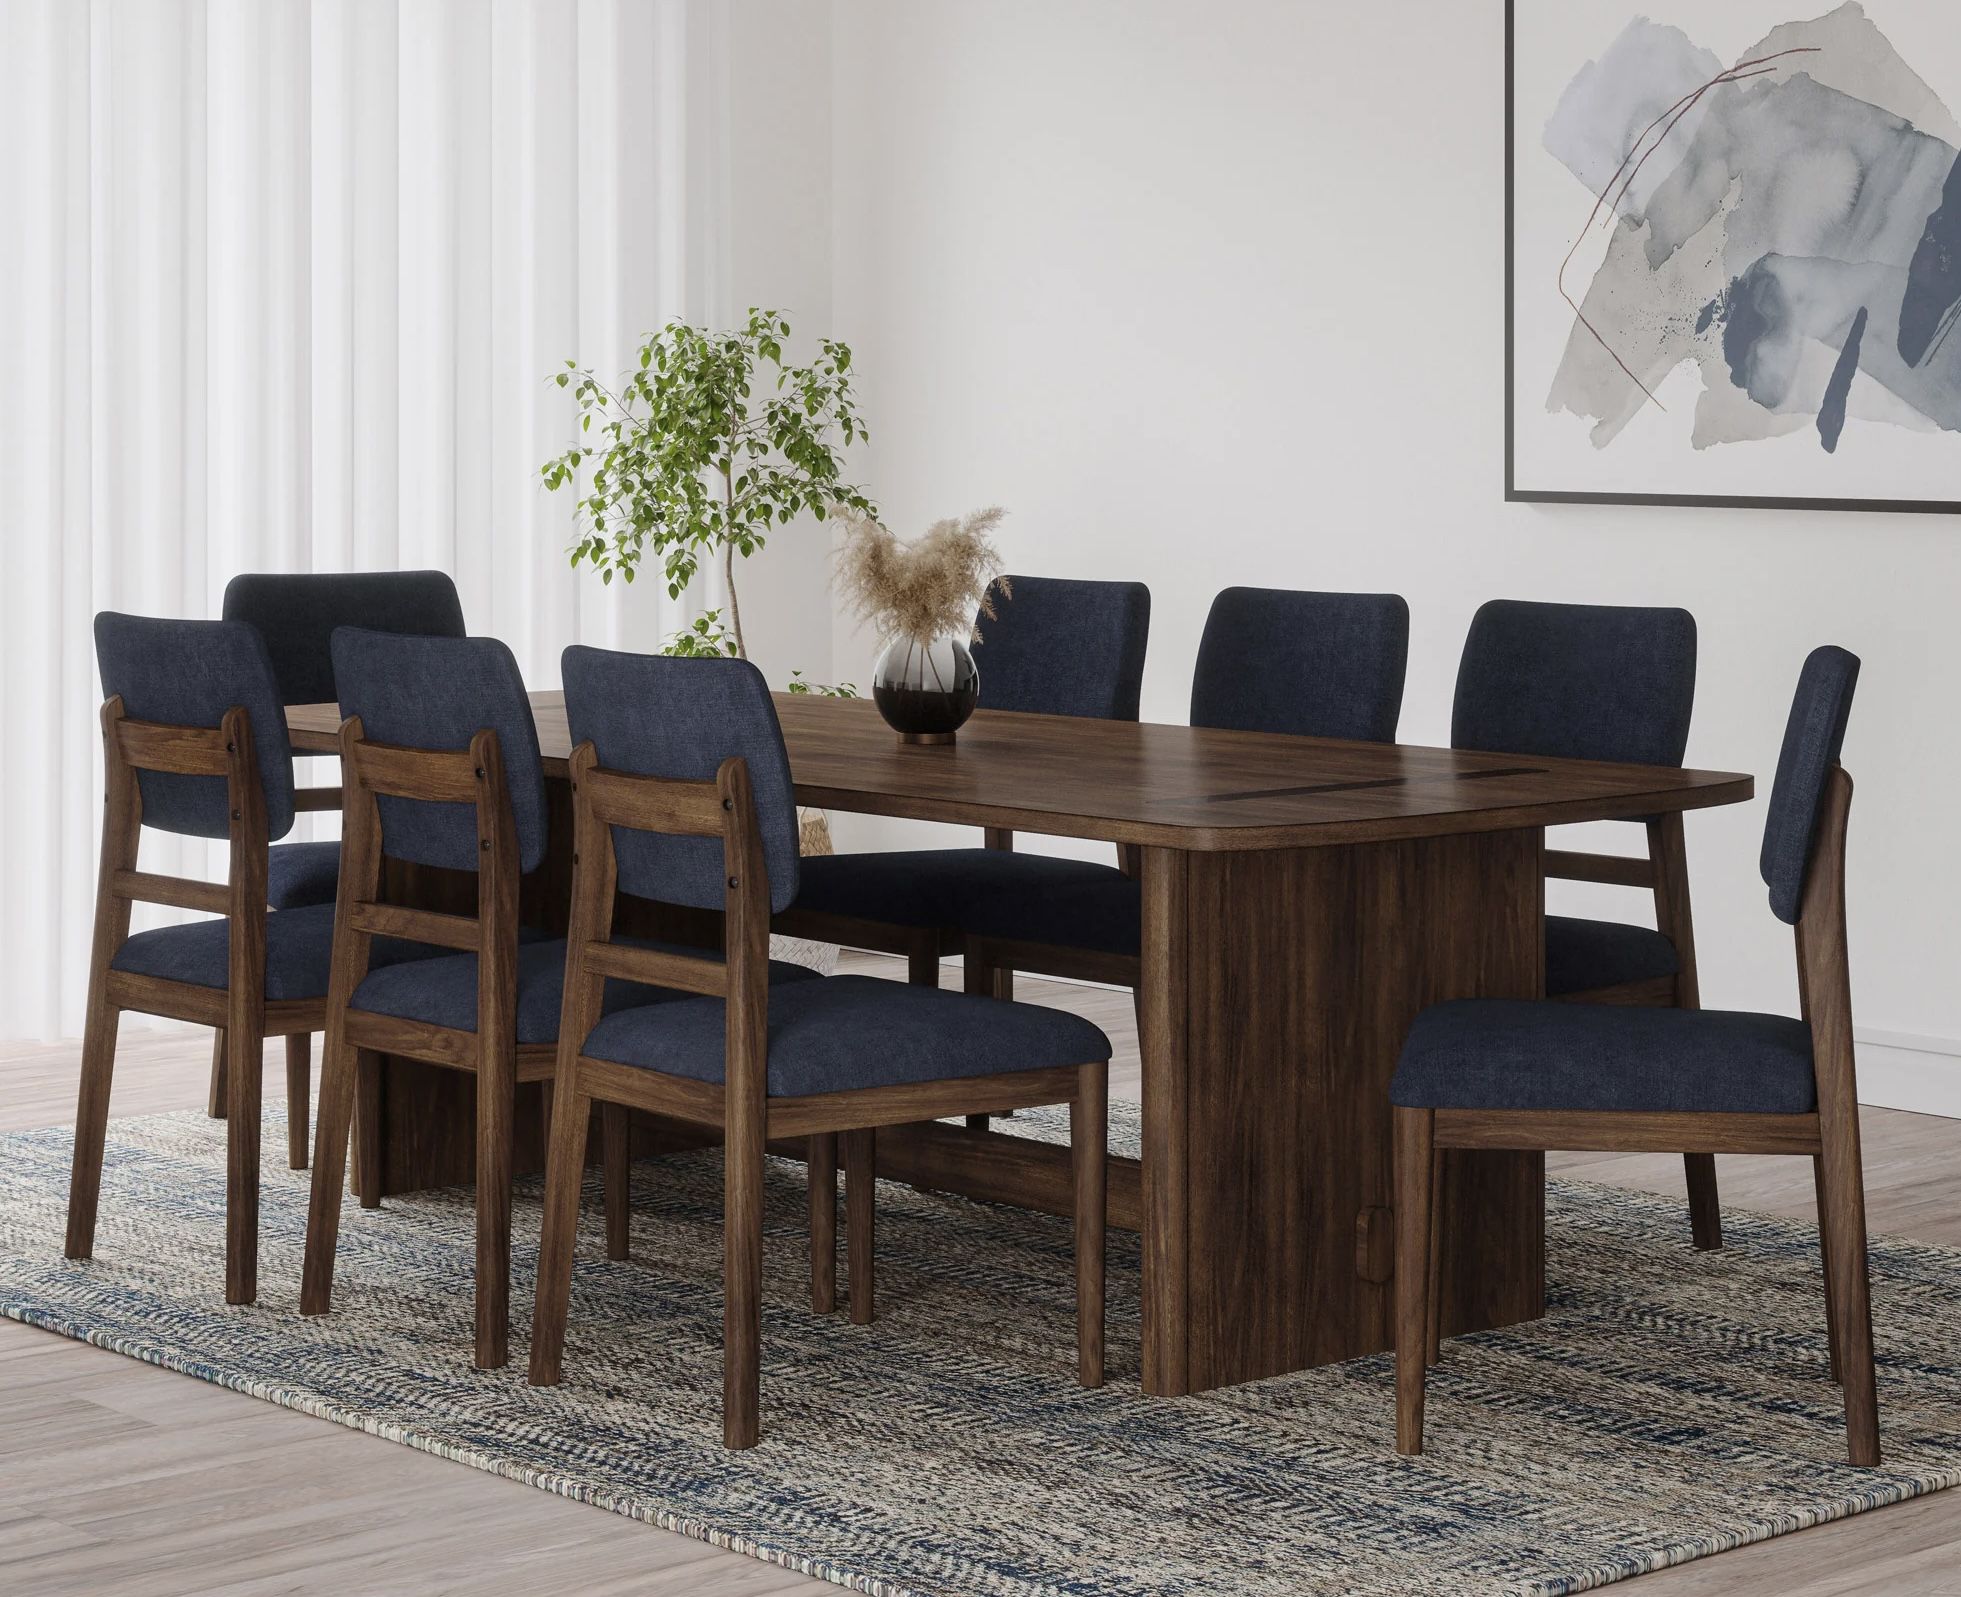 Large Dinning Table With 8 Chairs